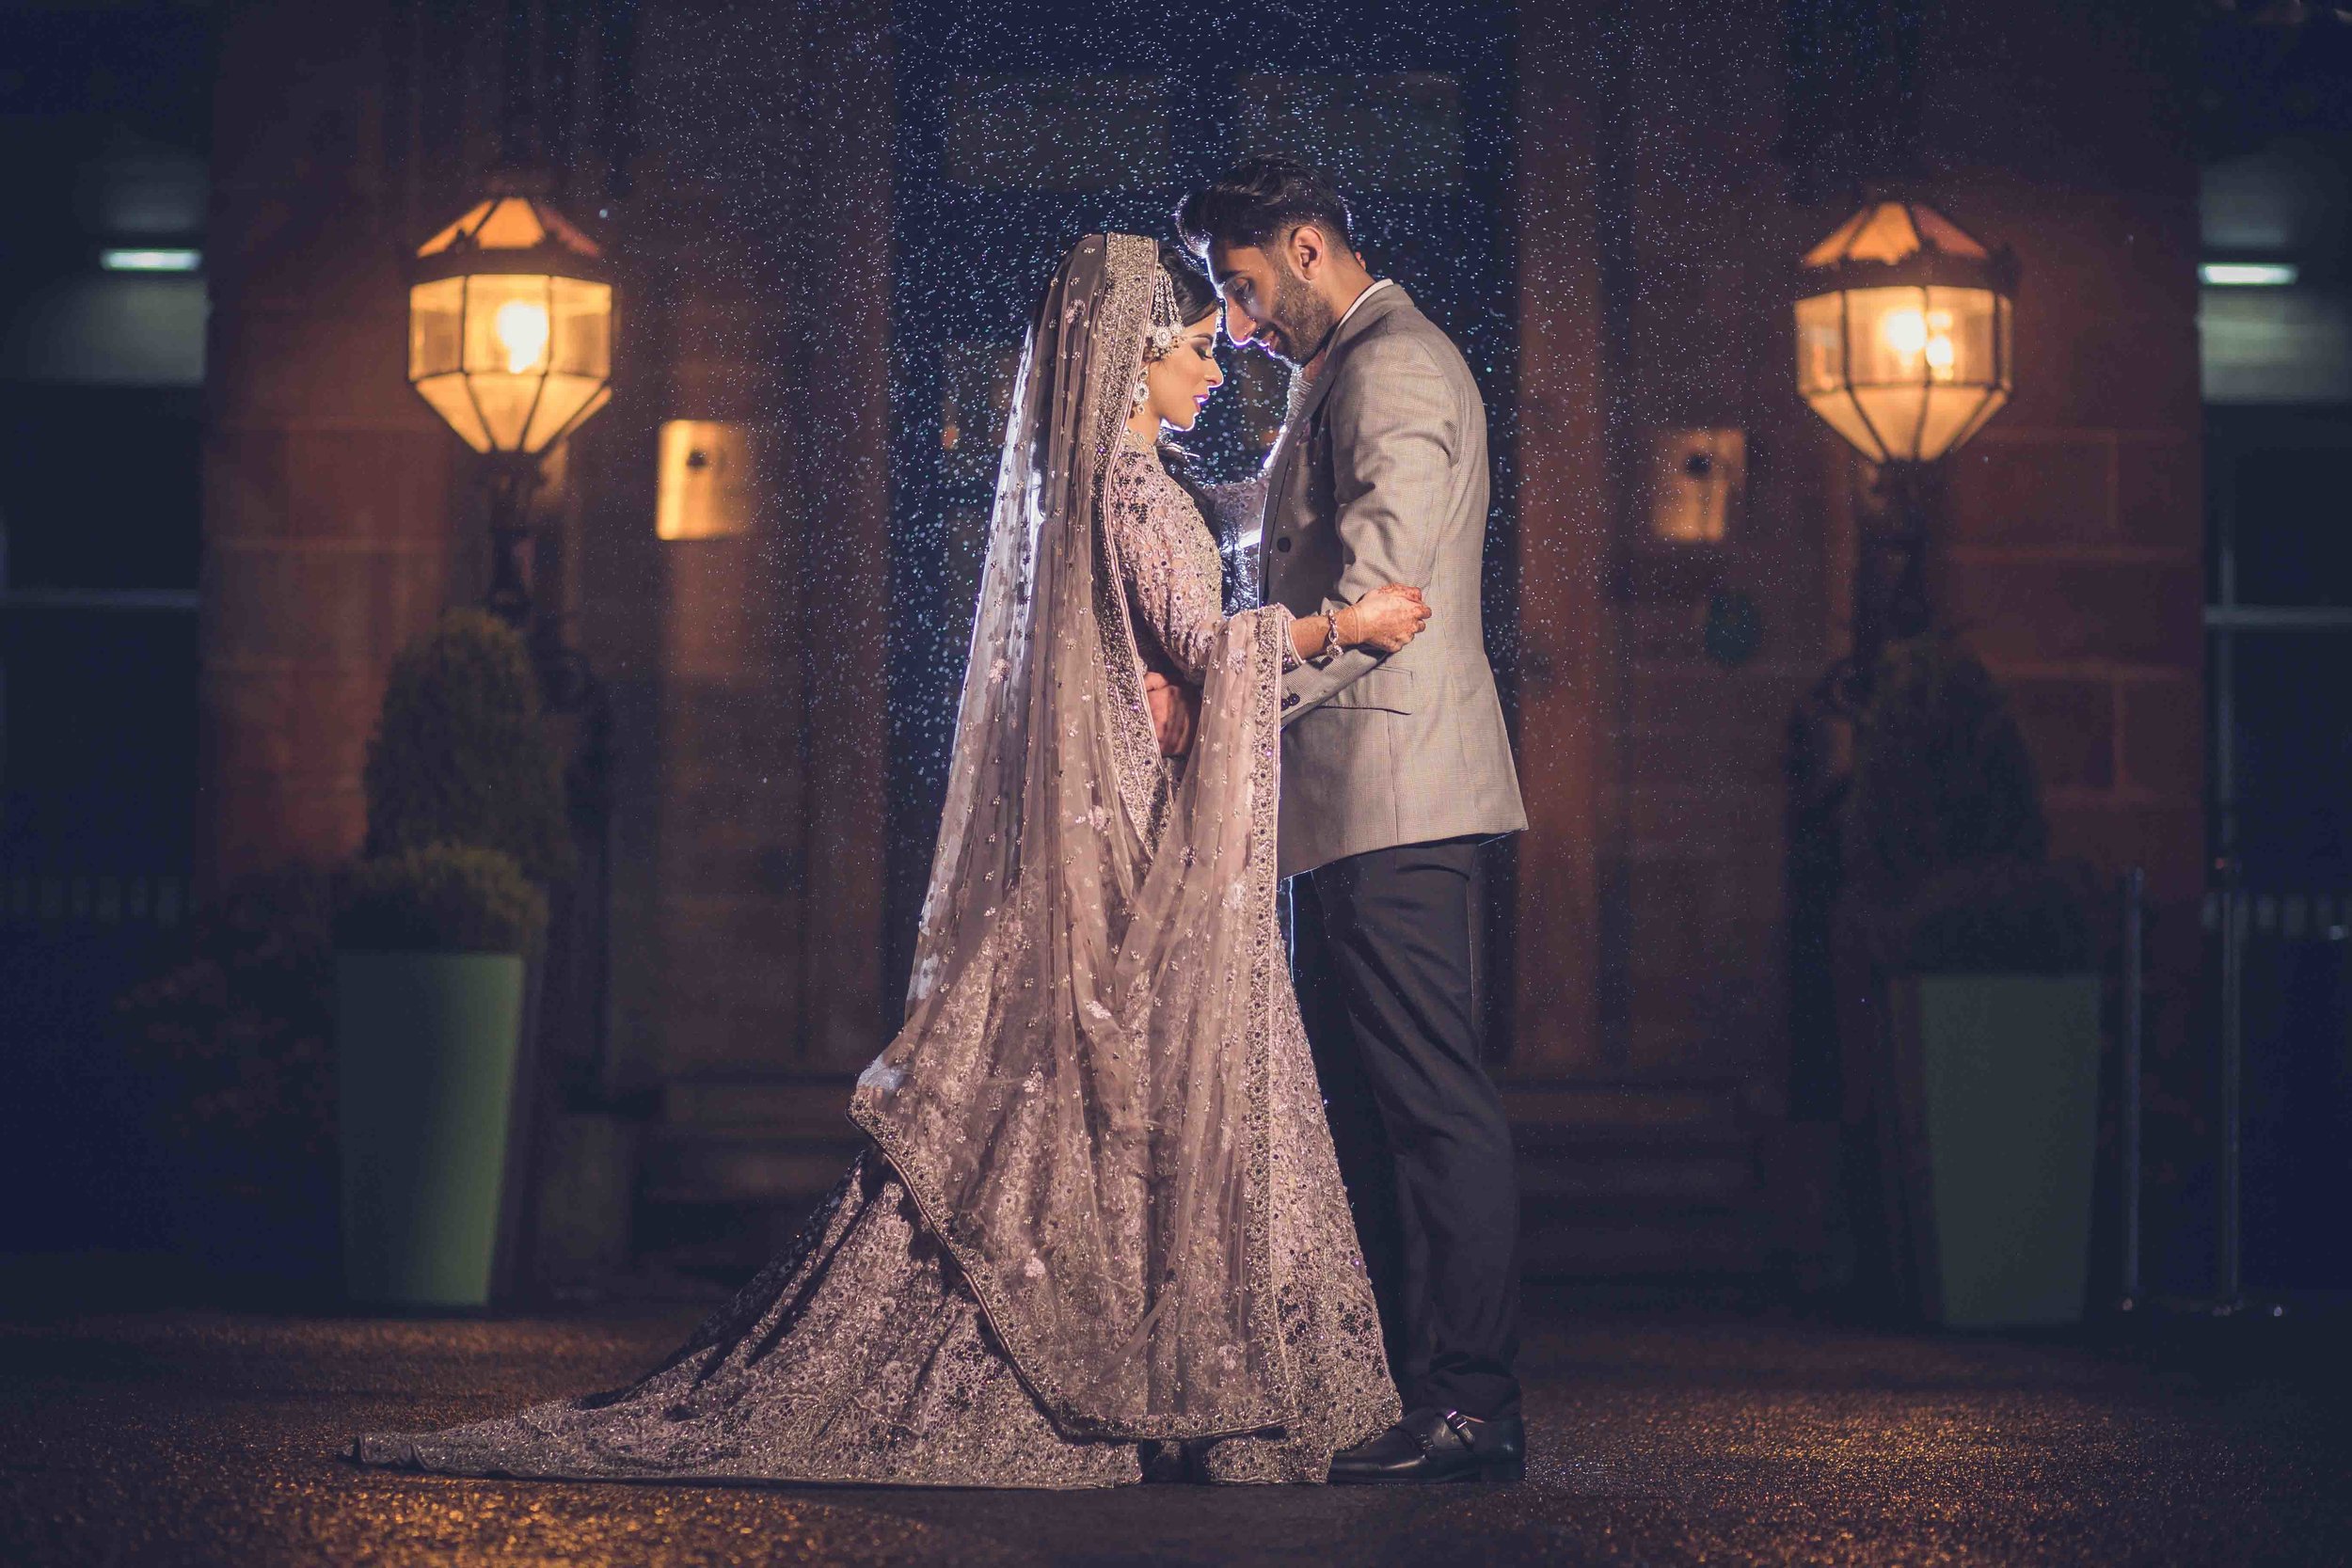 Asian Wedding Photography Guide For Beginners 10 Professional Asian Wedding Photographers